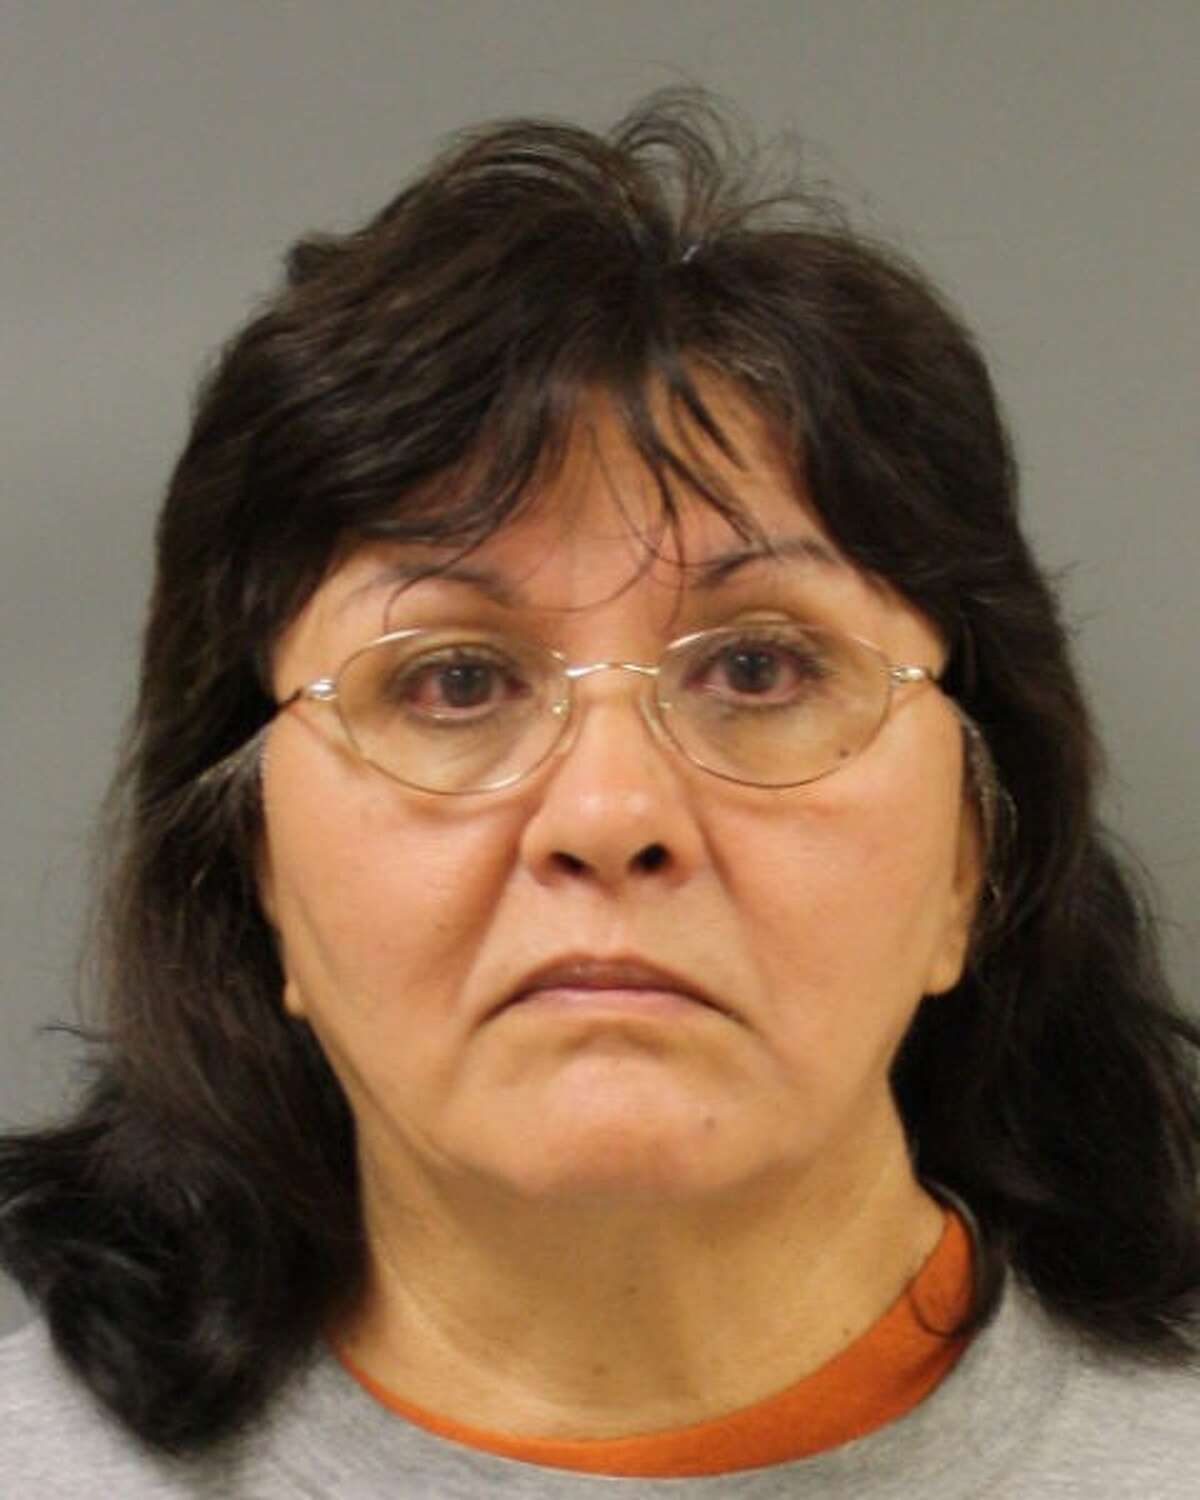 Irene Esther Stokes, 61, of Montgomery, is charged with indecency with a child. She was released from the Harris County Jail after posting a $10,000 bond. See photos of other Texas teachers embroiled in student sex scandals. Click here.